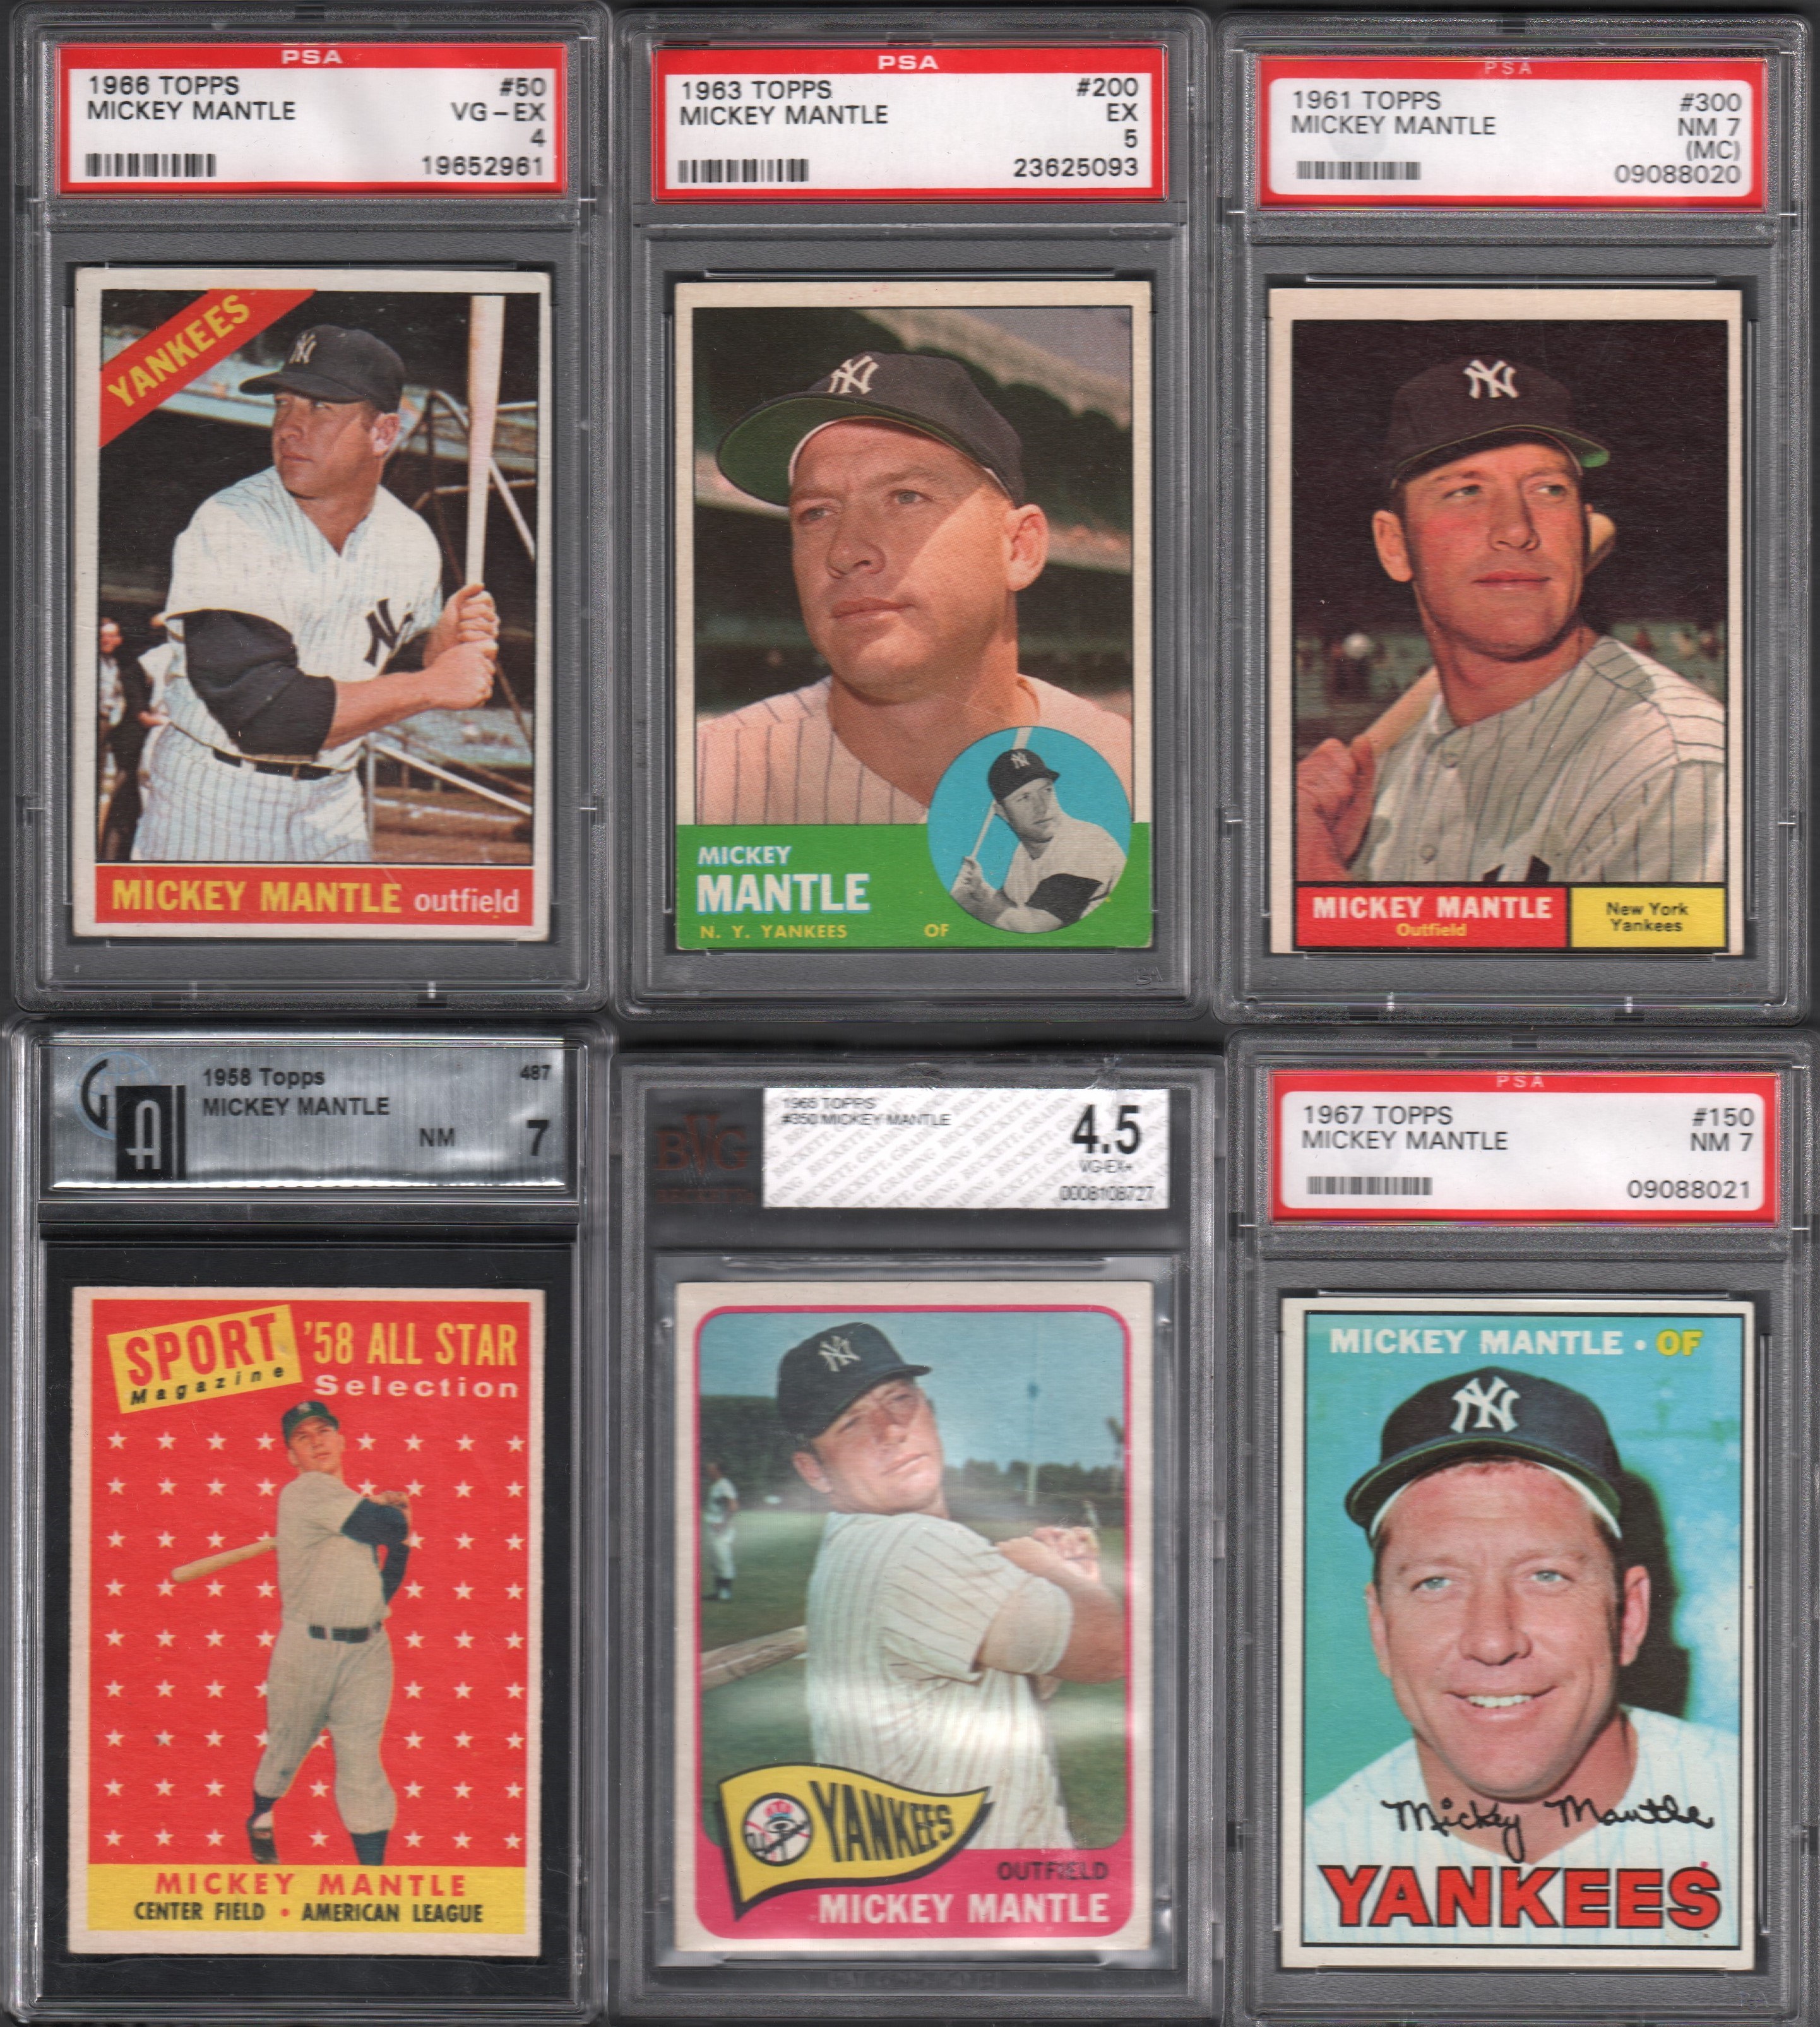 Baseball and Trading Cards - Mickey Mantle Topps and Bowman Graded Card Lot (11)